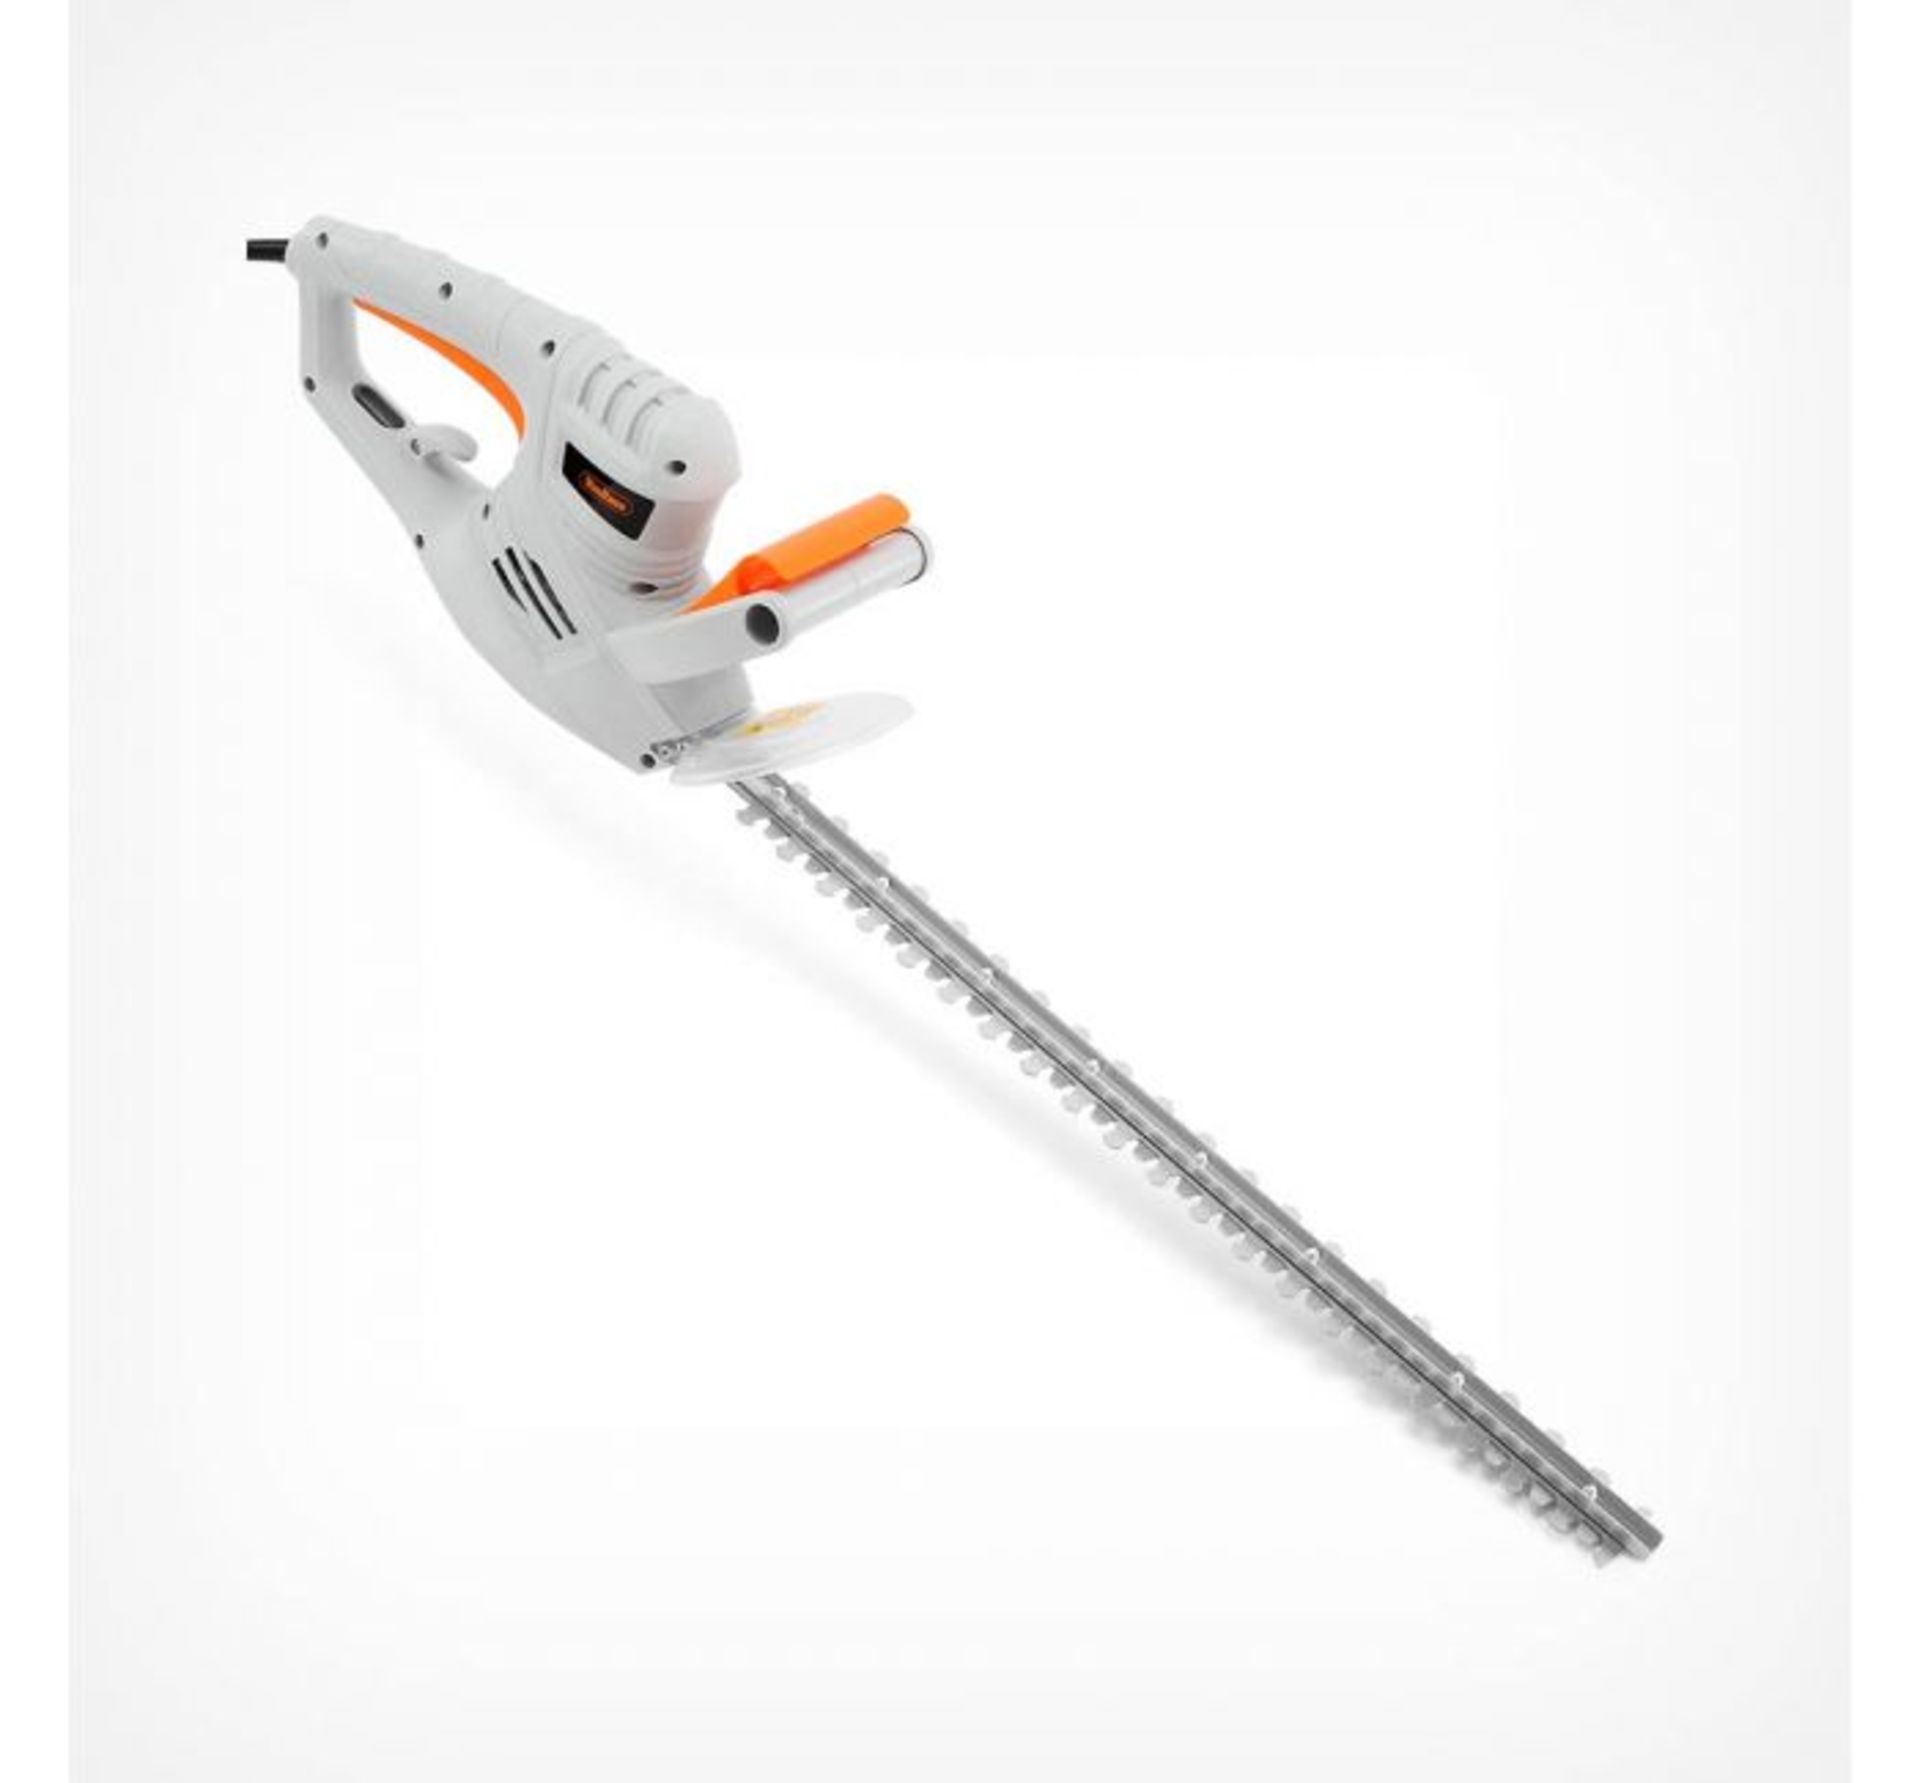 (DD17) 550W Hedge Trimmer Lightweight at only 3.2kg with a powerful 550W motor and precision b...